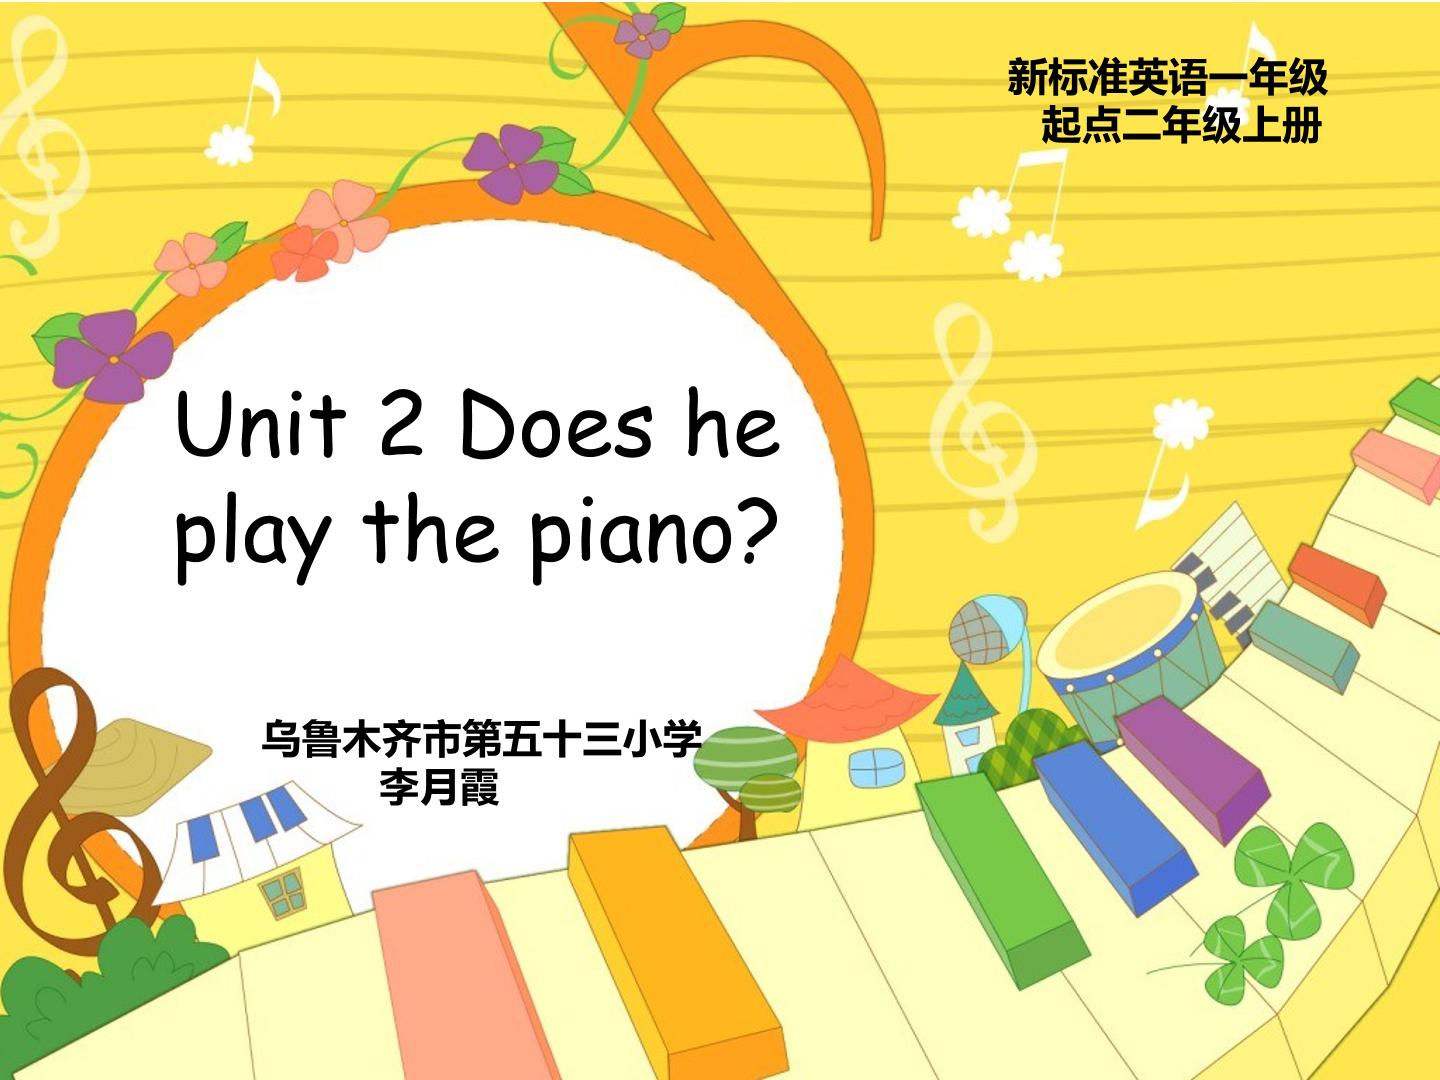 Does he play the piano?